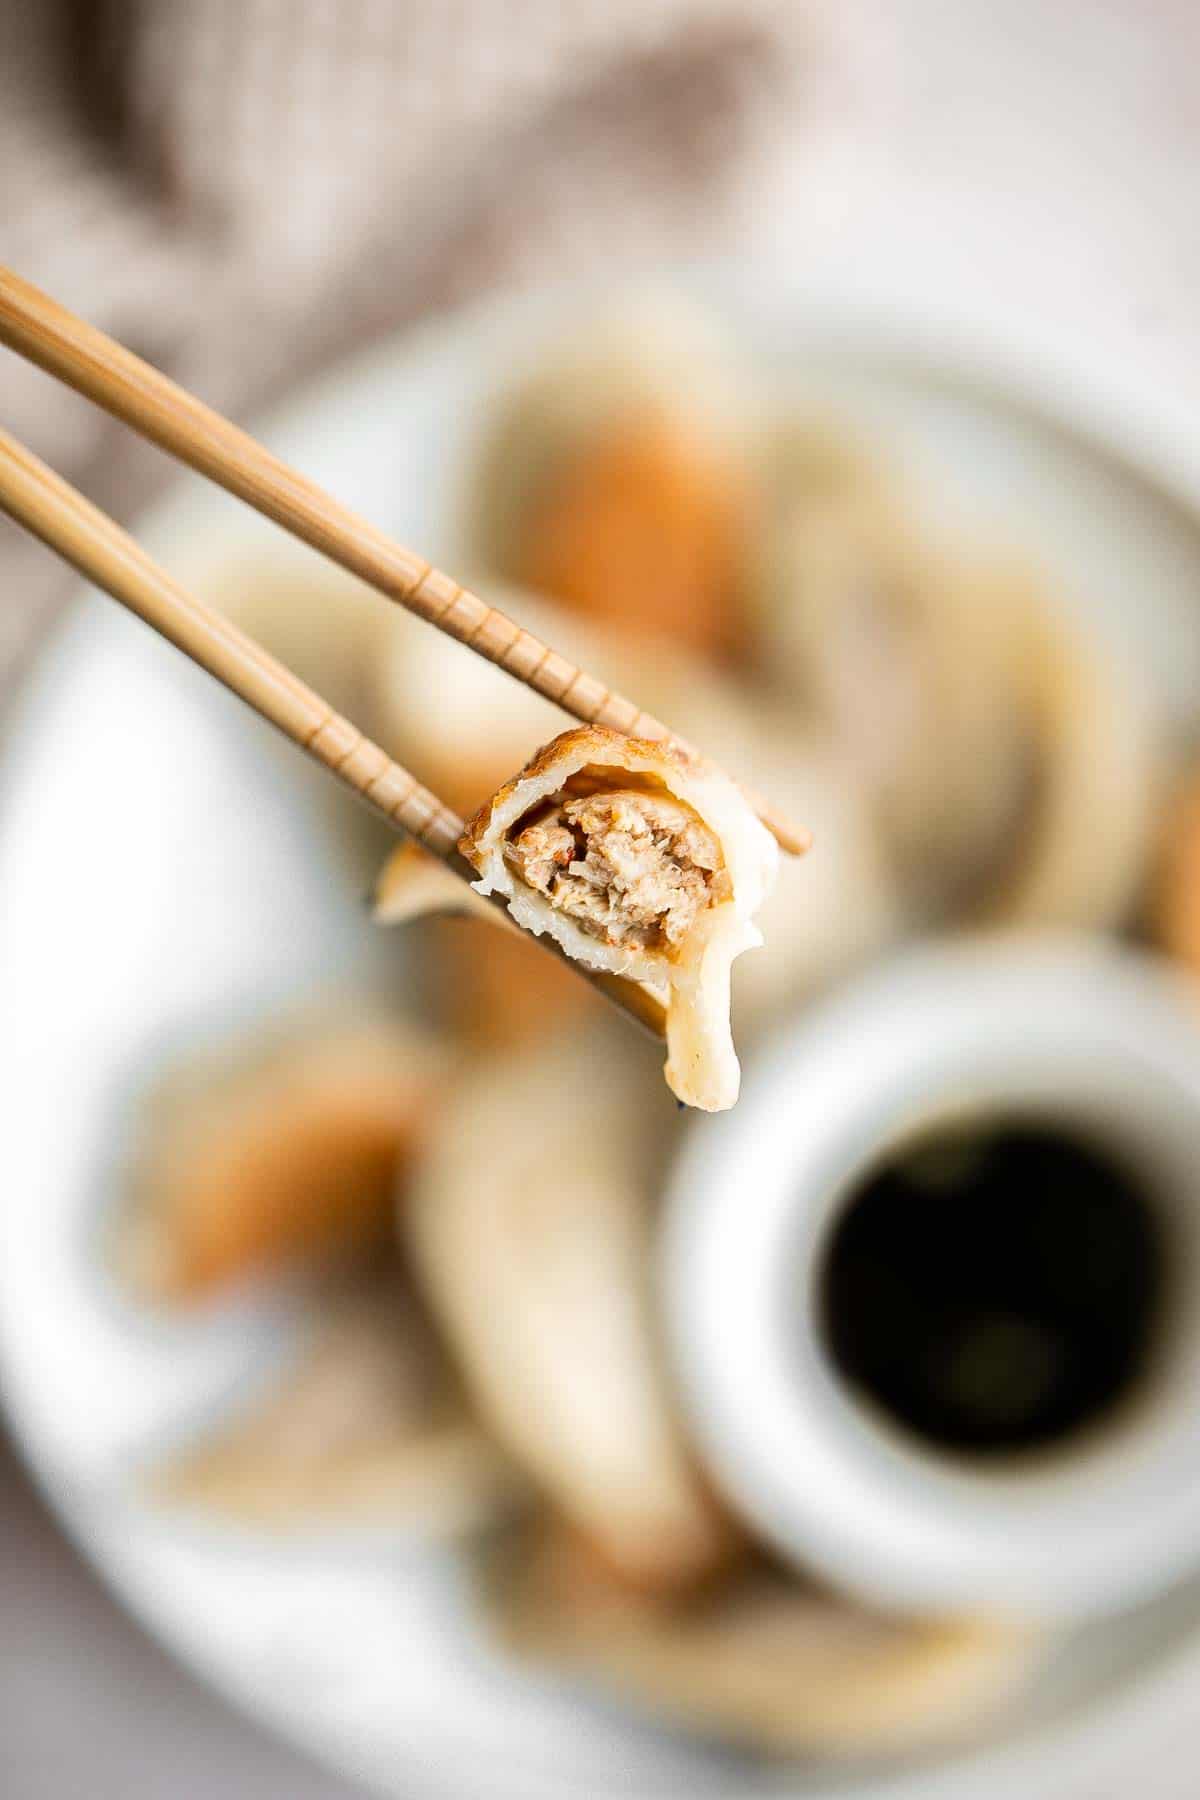 Kimchi Dumplings are savory, delicious, and flavorful. These Korean-inspired dumplings get seared and steamed to create classic crispy bottom potstickers. | aheadofthyme.com